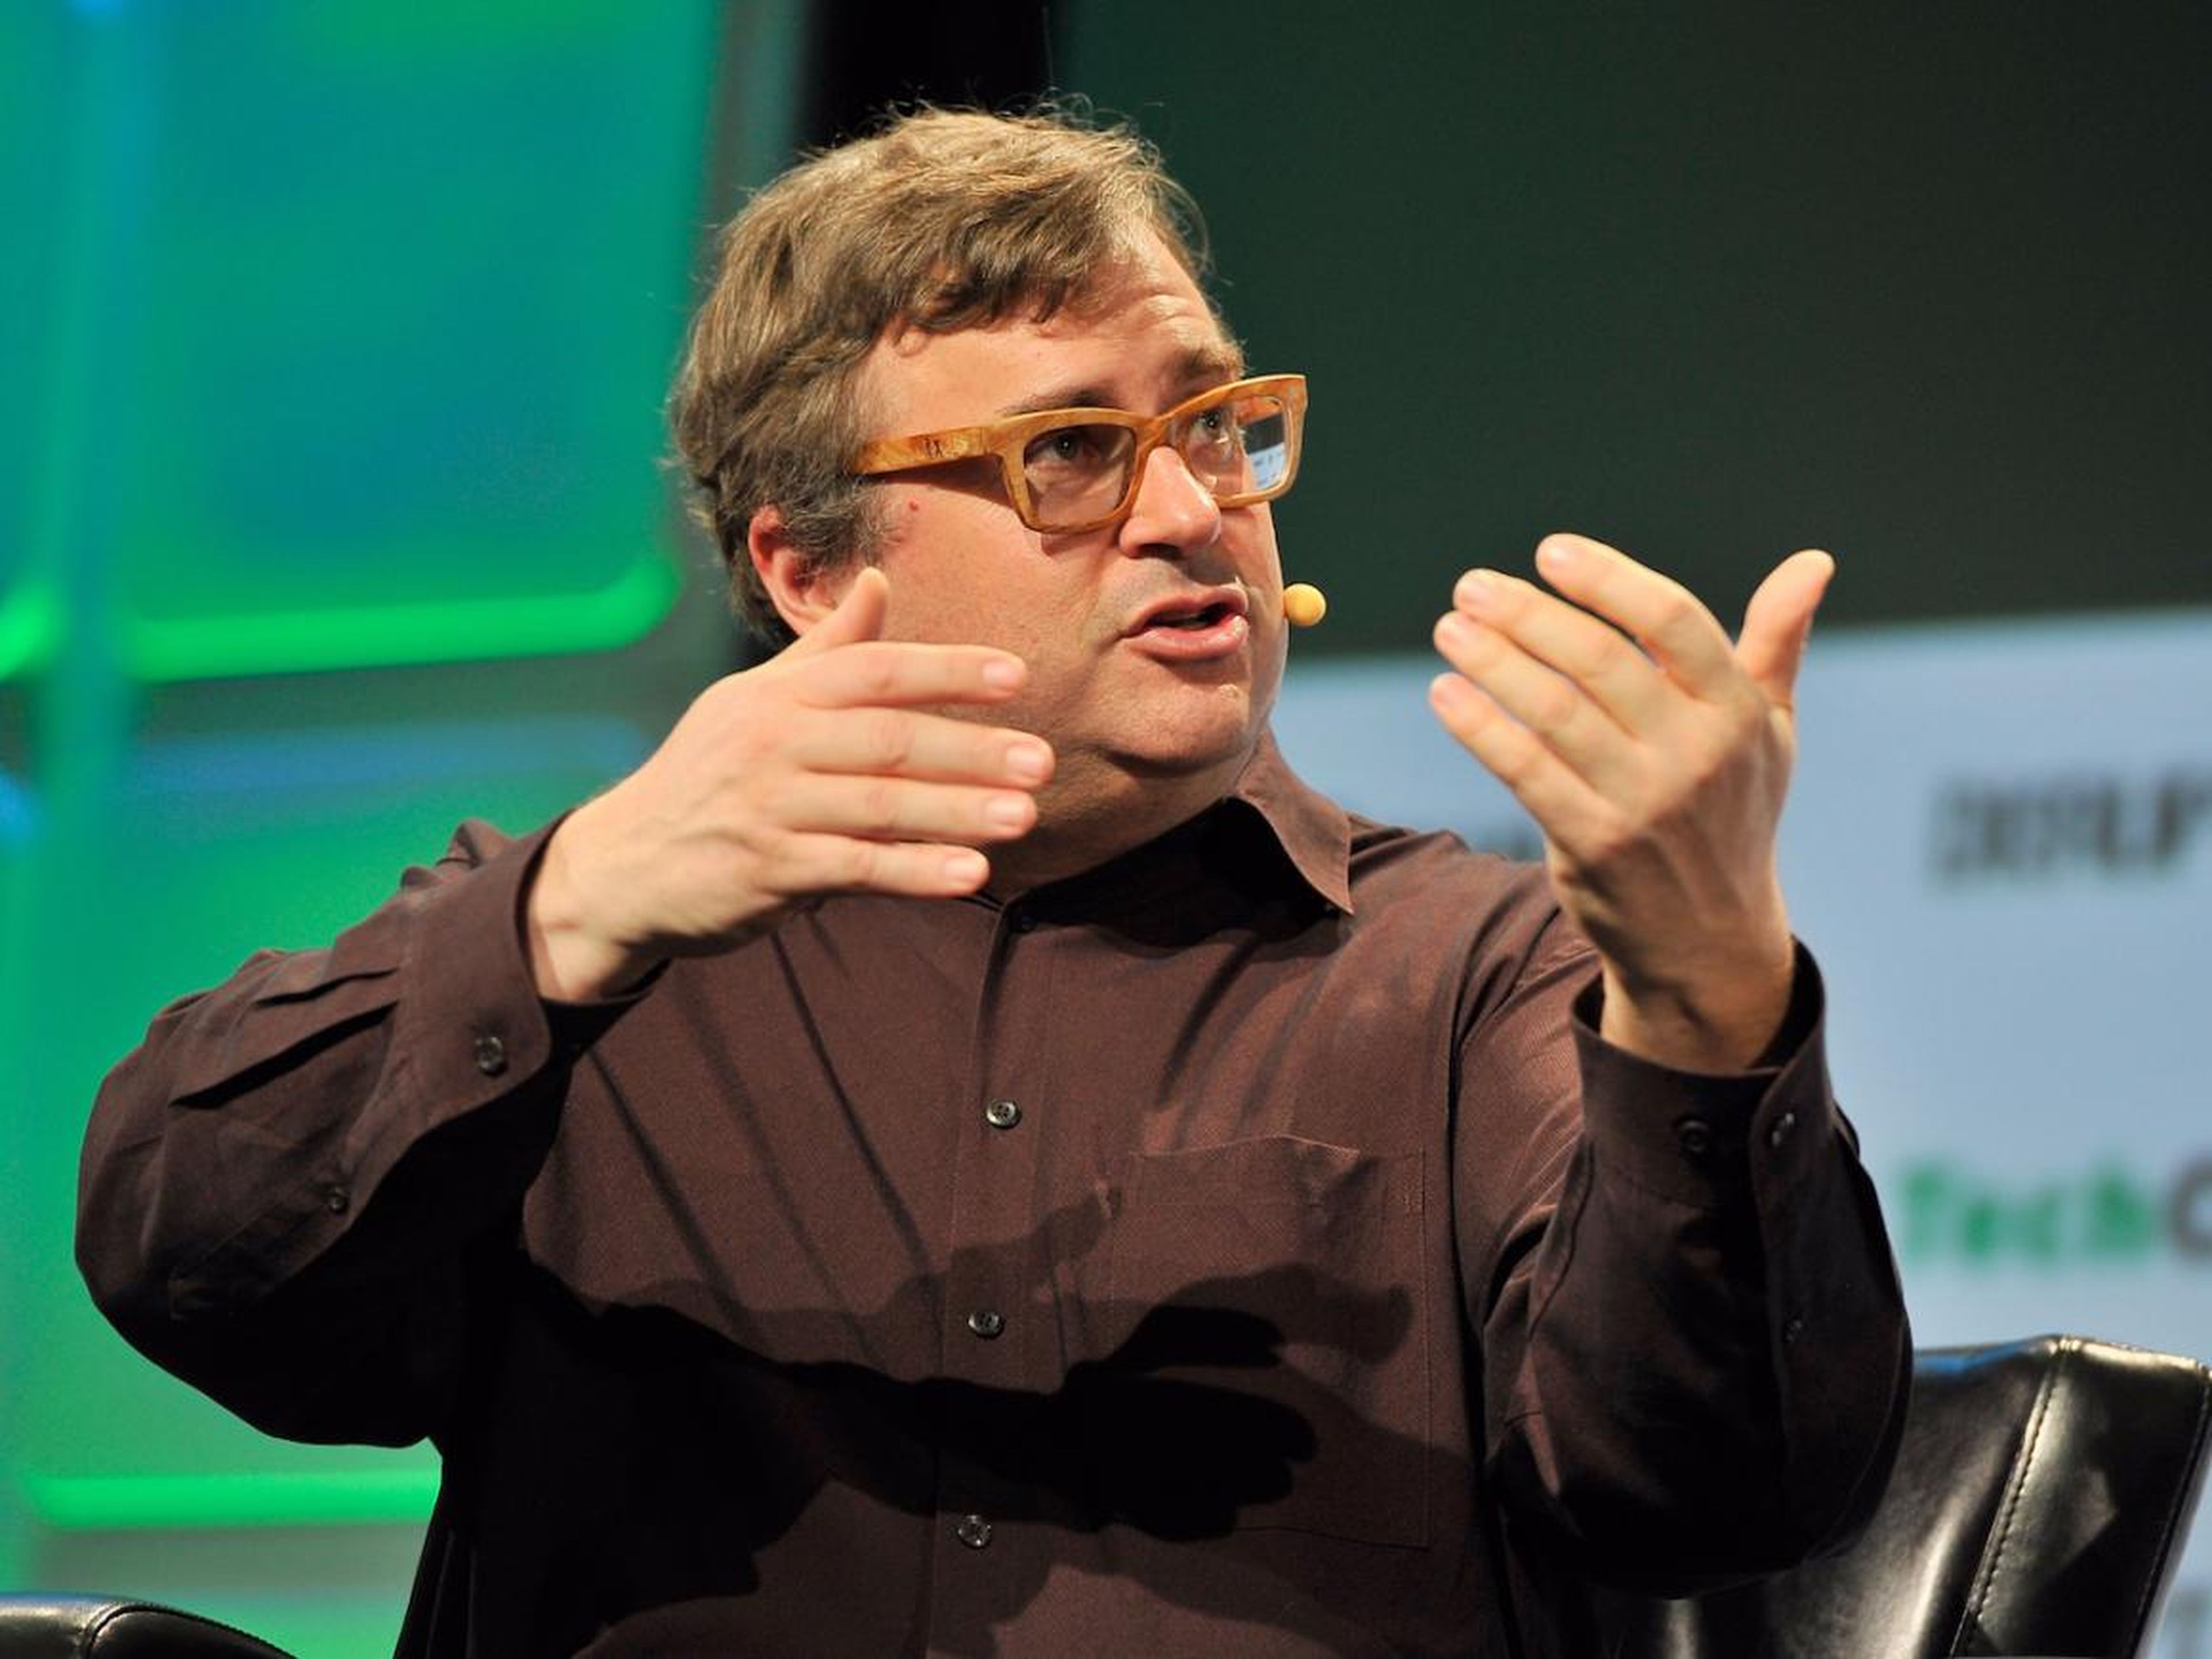 LinkedIn cofounder and 'Masters of Scale' host Reid Hoffman said he did his best thinking in places that are brand new to him, like a cafe he's never been to before.